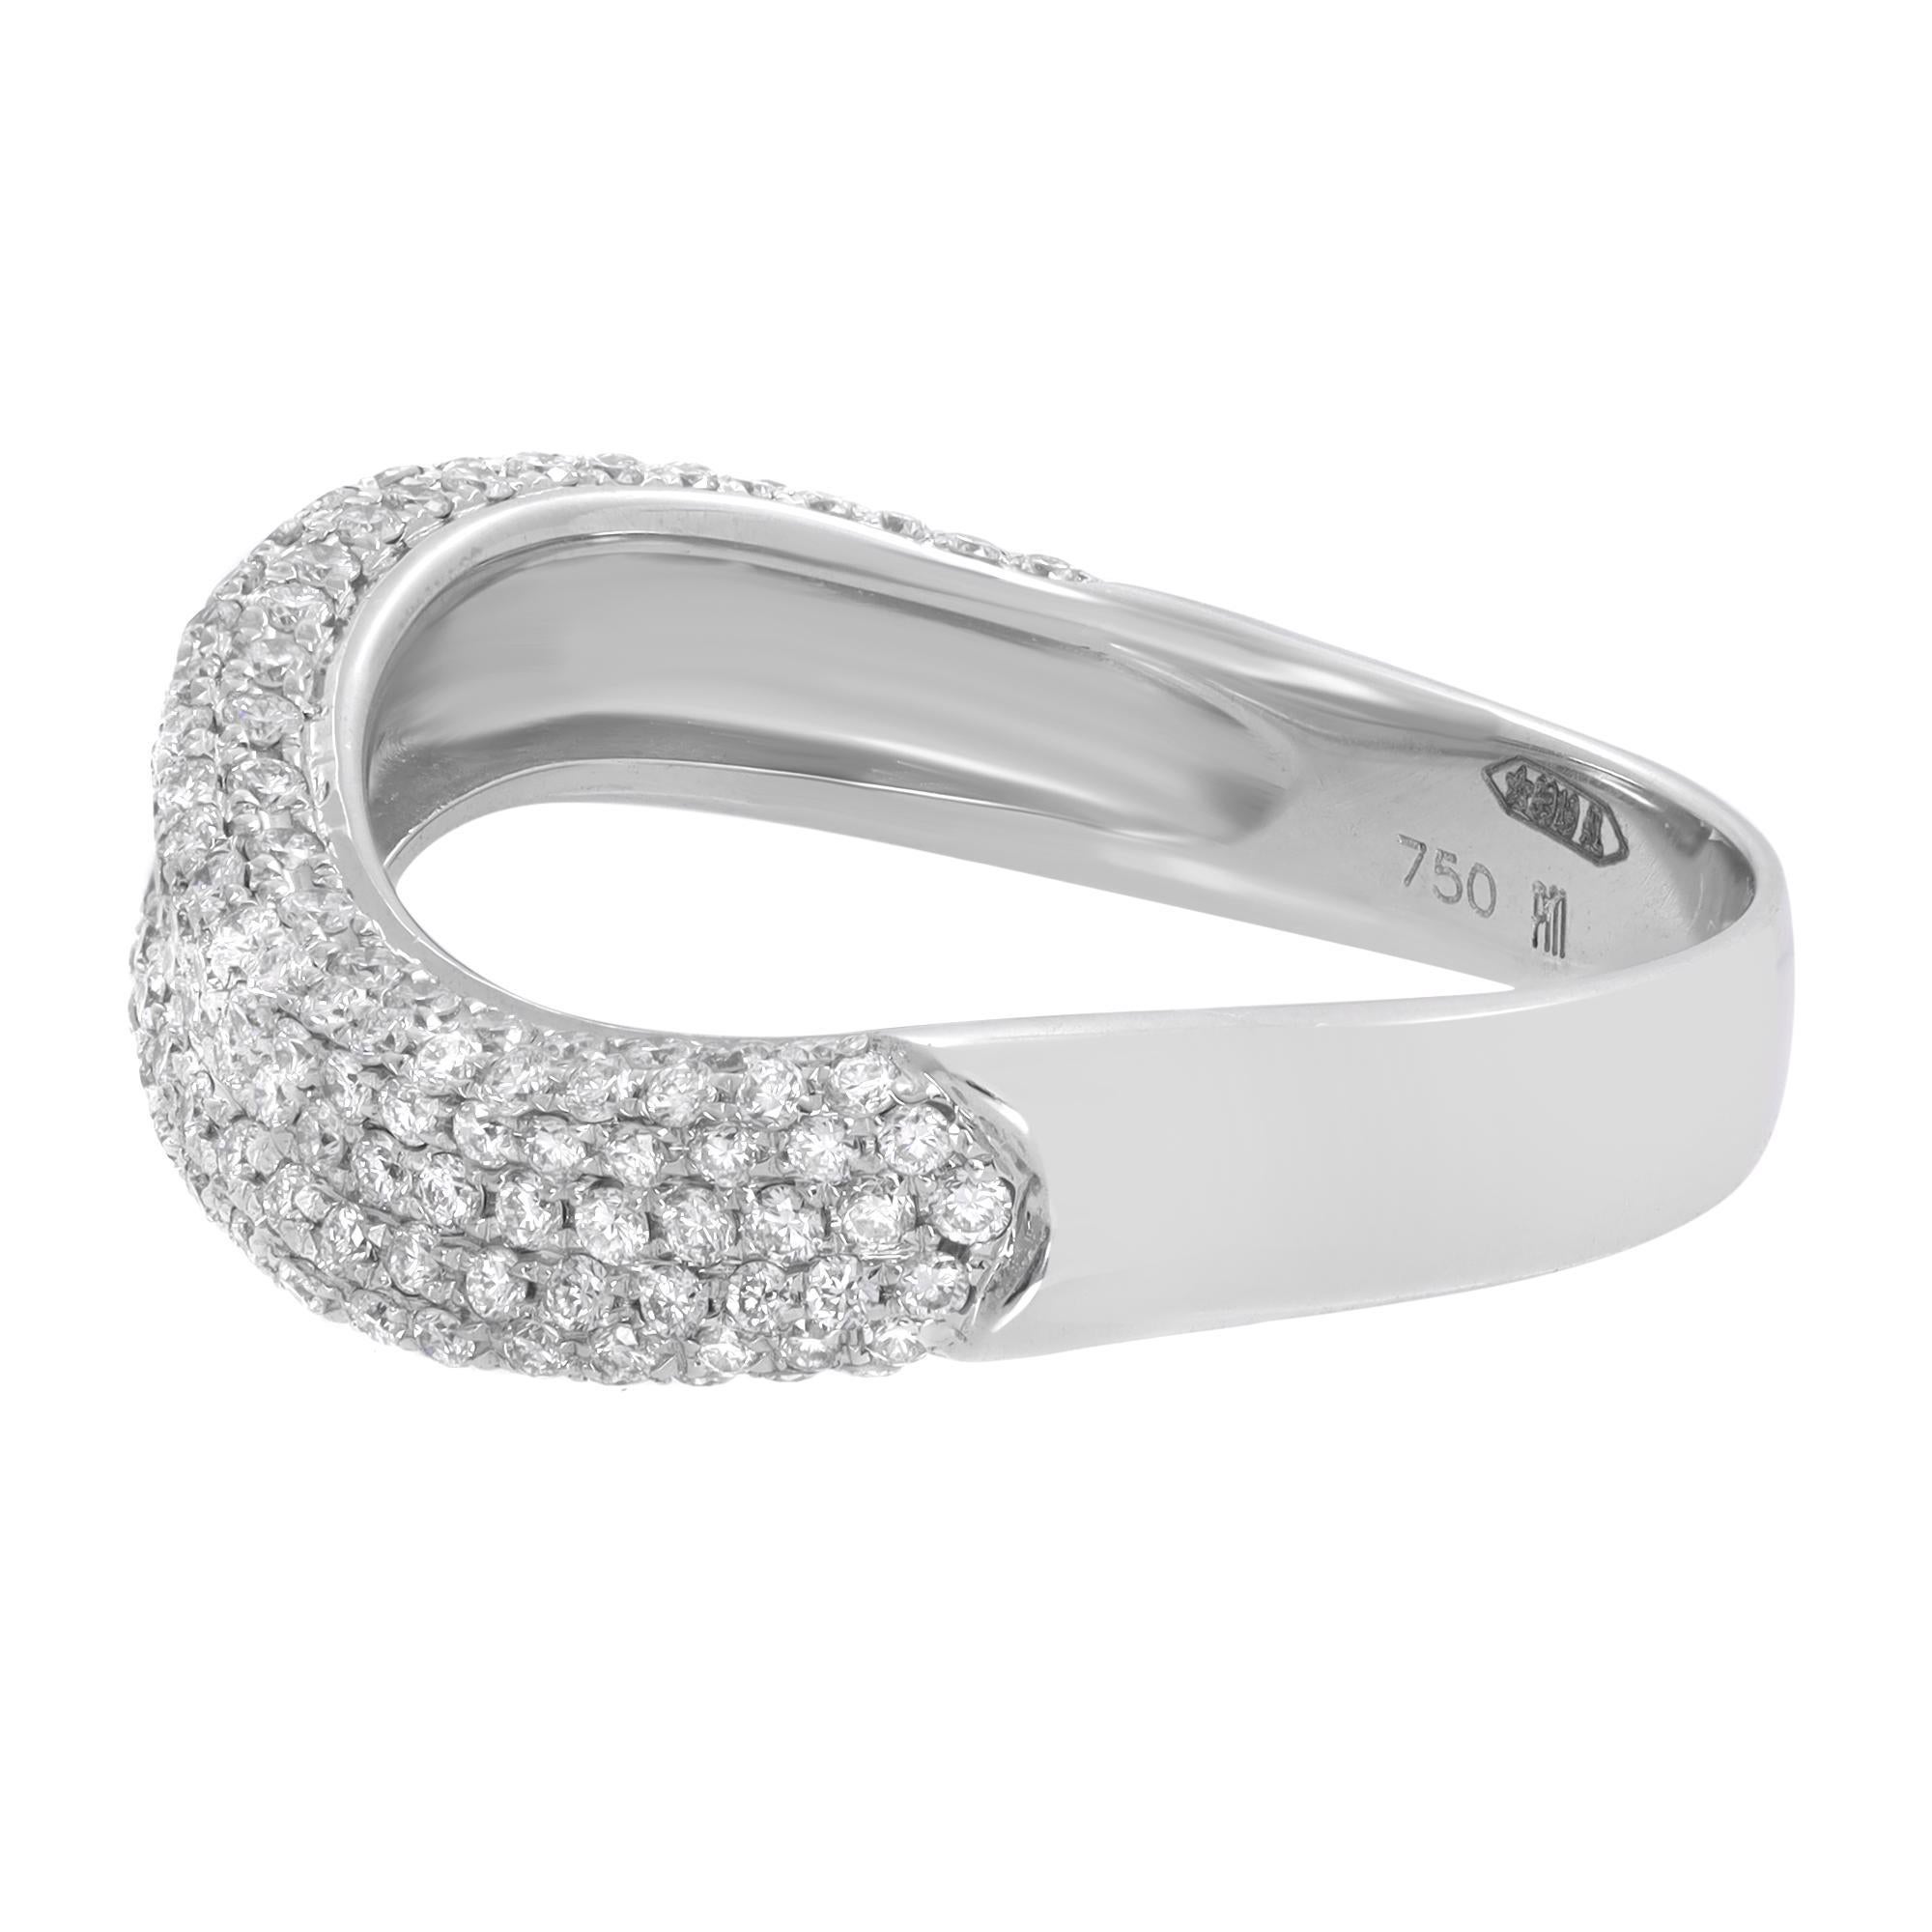 18k white gold natural diamond ring from Italian designer Piero Milano. This beautiful ring is made of 6 rows of natural white pave diamonds with a total of 0.71 cttw. Suitable for any occasion. Diamond color G-H and VS-SI clarity. Width: 4.50mm.